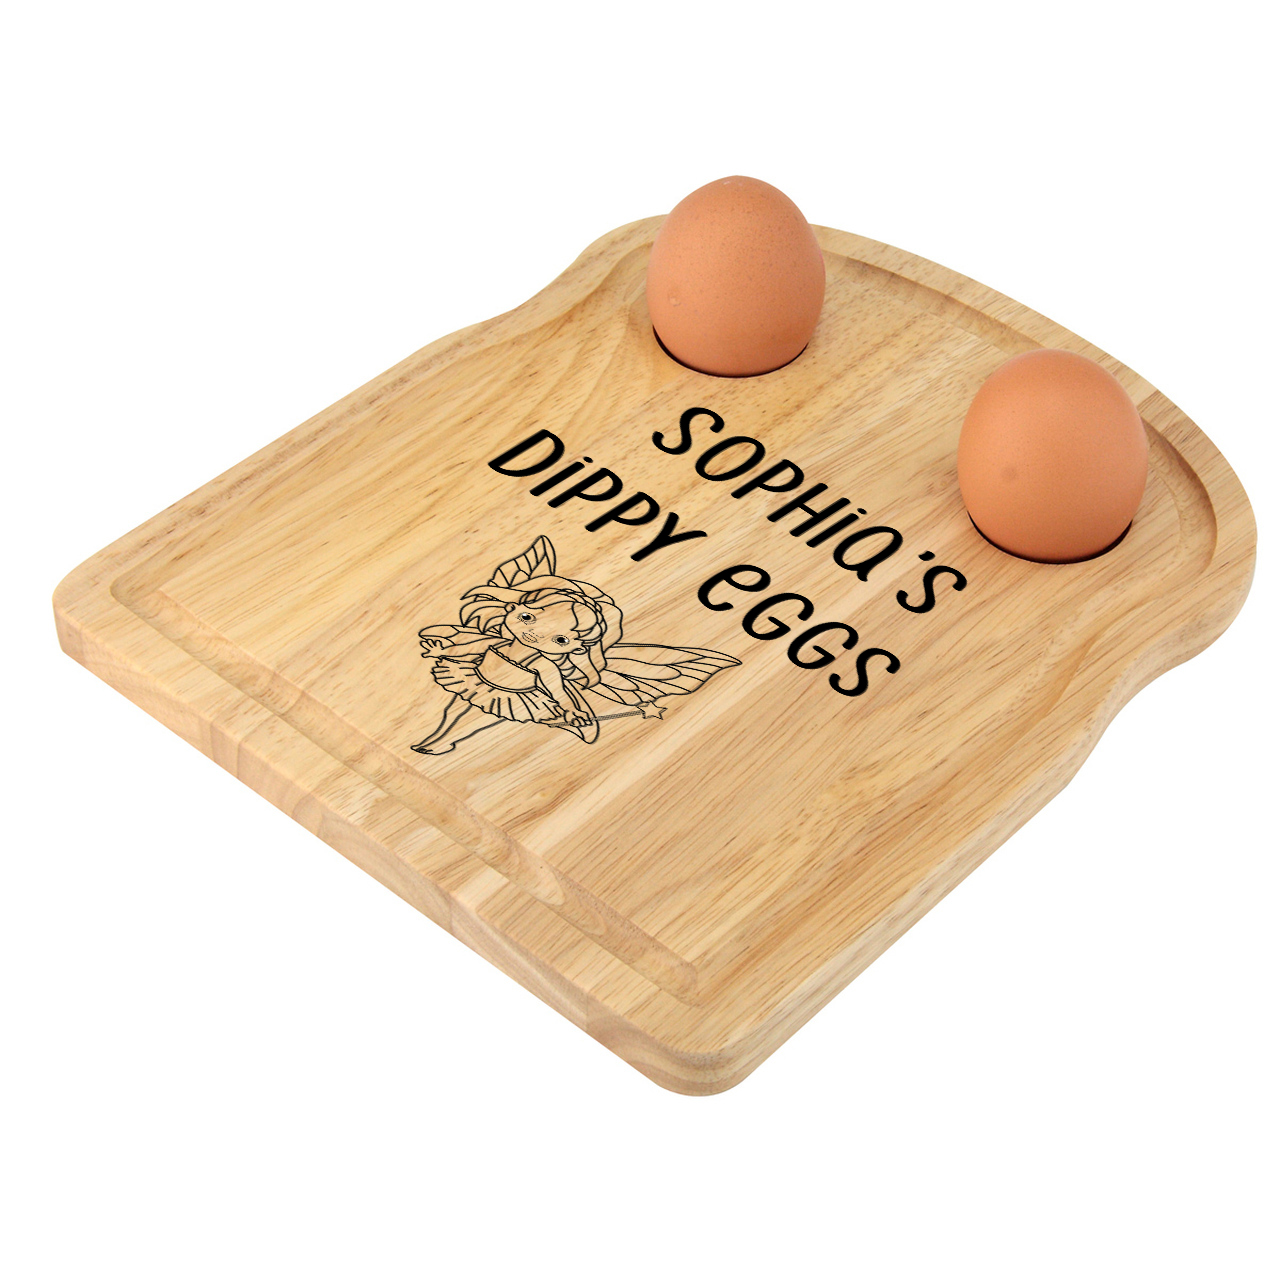 Wooden Loaf Egg Board with fairy personalised